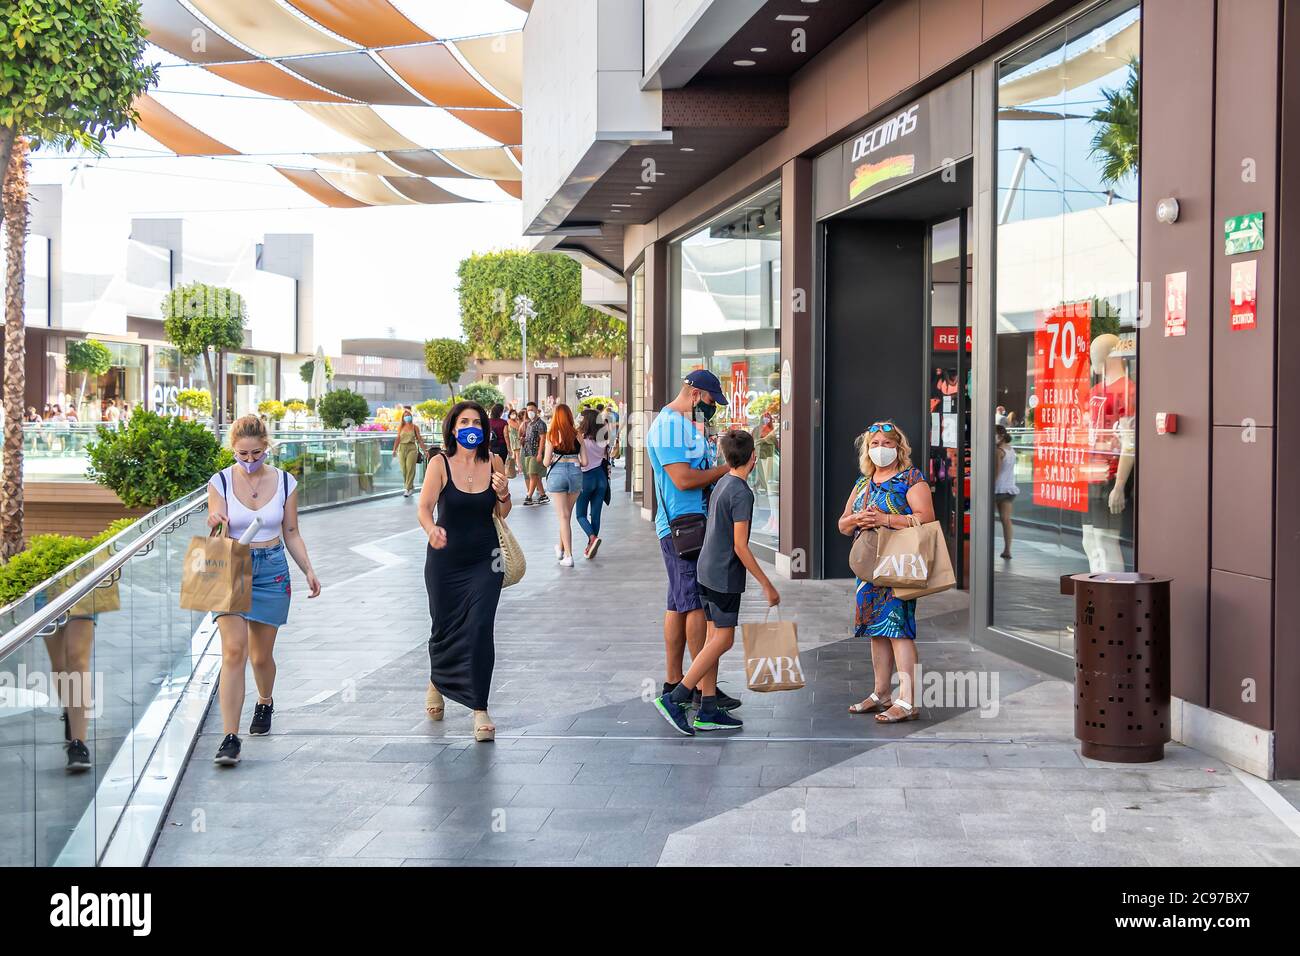 Huelva, Spain - July 27, 2020: People Shopping in Holea mall, wearing protective or medical face masks due to Covid-19 coronavirus. New normal in Spai Stock Photo